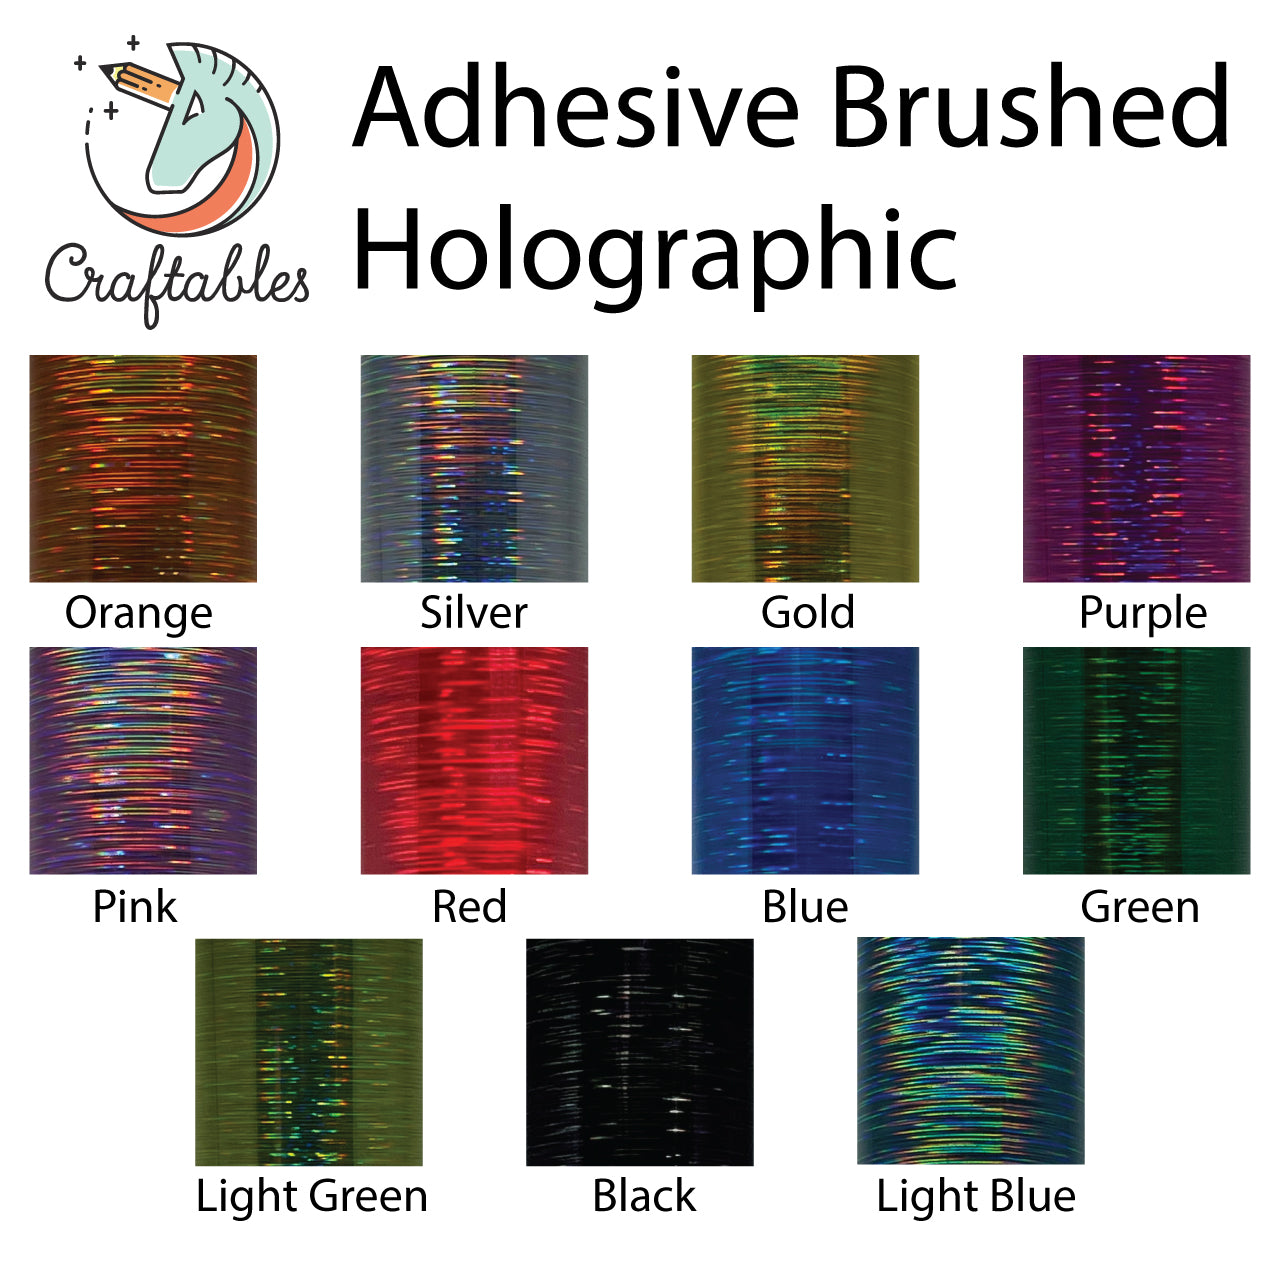 Silver Brushed Holographic Adhesive Vinyl Sheets By Craftables